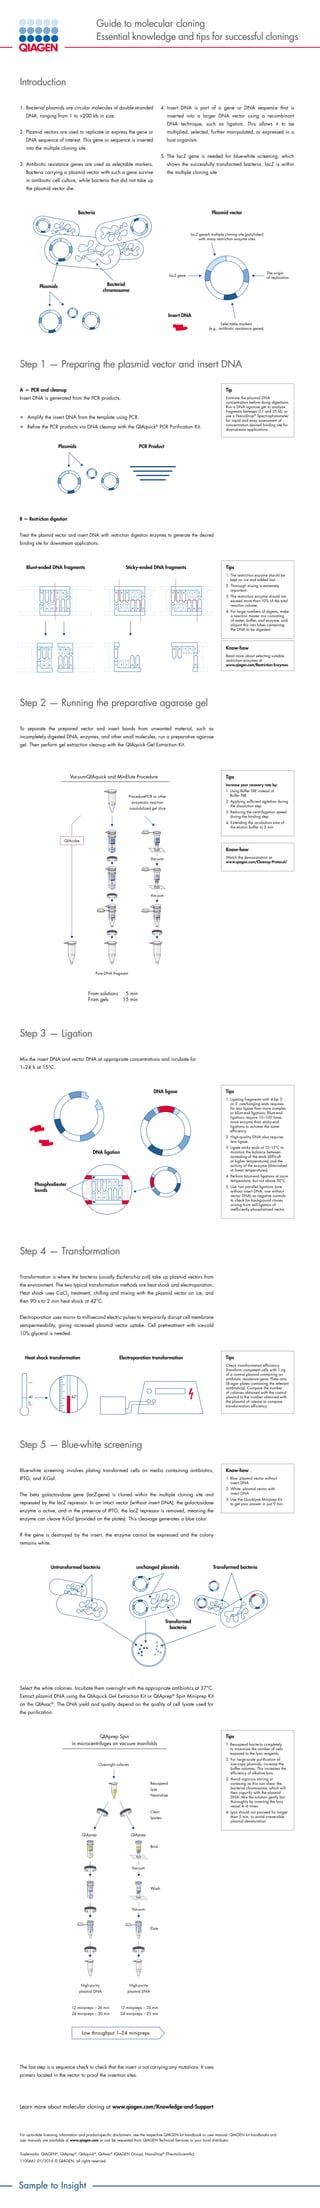 Guide to molecular cloning
Essential knowledge and tips for successful clonings
Introduction
1. Bacterial plasmids are circular molecules of double-stranded
DNA, ranging from 1 to 200 kb in size.
2. Plasmid vectors are used to replicate or express the gene or
DNA sequence of interest. This gene or sequence is inserted
into the multiple cloning site.
3. Antibiotic resistance genes are used as selectable markers.
Bacteria carrying a plasmid vector with such a gene survive
in antibiotic cell culture, while bacteria that did not take up
the plasmid vector die.
4. Insert DNA is part of a gene or DNA sequence that is
inserted into a larger DNA vector using a recombinant
DNA technique, such as ligation. This allows it to be
multiplied, selected, further manipulated, or expressed in a
host organism.
5. The lacZ gene is needed for blue-white screening, which
shows the successfully transformed bacteria. lacZ is within
the multiple cloning site
Step 1 — Preparing the plasmid vector and insert DNA
A — PCR and cleanup
Insert DNA is generated from the PCR products.
•	 Amplify the insert DNA from the template using PCR.
•	 Refine the PCR products via DNA cleanup with the QIAquick®
PCR Purification Kit.
B — Restriction digestion
Treat the plasmid vector and insert DNA with restriction digestion enzymes to generate the desired
binding site for downstream applications.
Step 2 — Running the preparative agarose gel
To separate the prepared vector and insert bands from unwanted material, such as
incompletely digested DNA, enzymes, and other small molecules, run a preparative agarose
gel. Then perform gel extraction cleanup with the QIAquick Gel Extraction Kit.
Step 3 — Ligation
Mix the insert DNA and vector DNA at appropriate concentrations and incubate for
1–24 h at 15°C.
Step 4 — Transformation
Transformation is where the bacteria (usually Escherichia coli) take up plasmid vectors from
the environment. The two typical transformation methods are heat shock and electroporation.
Heat shock uses CaCl2
treatment, chilling and mixing with the plasmid vector on ice, and
then 90 s to 2 min heat shock at 42°C.
Electroporation uses micro- to millisecond electric pulses to temporarily disrupt cell membrane
semipermeability, giving increased plasmid vector uptake. Cell pretreatment with ice-cold
10% glycerol is needed.
Step 5 — Blue-white screening
Blue-white screening involves plating transformed cells on media containing antibiotics,
IPTG, and X-Gal.
The beta galactosidase gene (lacZ-gene) is cloned within the multiple cloning site and
repressed by the lacZ repressor. In an intact vector (without insert DNA), the galactosidase
enzyme is active, and in the presence of IPTG, the lacZ repressor is removed, meaning the
enzyme can cleave X-Gal (provided on the plates). This cleavage generates a blue color.
If the gene is destroyed by the insert, the enzyme cannot be expressed and the colony
remains white.
Select the white colonies. Incubate them overnight with the appropriate antibiotics at 37°C.
Extract plasmid DNA using the QIAquick Gel Extraction Kit or QIAprep®
Spin Miniprep Kit
on the QIAvac®
. The DNA yield and quality depend on the quality of cell lysate used for
the purification.
Sample to Insight
Tip
Estimate the plasmid DNA
concentration before doing digestions.
Run a DNA agarose gel to analyze
fragments between 0.1 and 25 kb, or
use a NanoDrop®
Spectrophotometer
for rapid and easy assessment of
concentration.desired binding site for
downstream applications.
Tips
1. The restriction enzyme should be
kept on ice and added last.
2. Thorough mixing is extremely
important.
3. The restriction enzyme should not
exceed more than 10% of the total
reaction volume.
4. For large numbers of digests, make
a reaction master mix consisting
of water, buffer, and enzyme, and
aliquot this into tubes containing
the DNA to be digested.
Tips
Increase your recovery rate by:
1. Using Buffer TAE instead of
Buffer TBE
2. Applying sufficient agitation during
the dissolution step
3. Reducing the centrifugation speed
during the binding step
4. Extending the incubation time of
the elution buffer to 5 min
Know-how
Watch the demonstration at
www.qiagen.com/Cleanup-Protocol/
Tips
1. Ligating fragments with 4-bp 3’
or 5’ overhanging ends requires
far less ligase than more complex
or blunt-end ligations. Blunt-end
ligations require 10–100 times
more enzyme than sticky-end
ligations to achieve the same
efficiency.
2.High-quality DNA also requires
less ligase.
3. Ligate sticky ends at 12–15°C to
maintain the balance between
annealing of the ends (difficult
at higher temperatures) and the
activity of the enzyme (diminished
at lower temperatures).
4. Perform blunt-end ligations at room
temperature, but not above 30°C.
5. Use two parallel ligations (one
without insert DNA, one without
vector DNA) as negative controls
to check for background clones
arising from self-ligation of
inefficiently phosphatized vector.
Tips
Check transformation efficiency.
Transform competent cells with 1 ng
of a control plasmid containing an
antibiotic resistance gene. Plate onto
LB-agar plates containing the relevant
antibiotic(s). Compare the number
of colonies obtained with the control
plasmid to the number obtained with
the plasmid of interest to compare
transformation efficiency.
Know-how
1. Blue: plasmid vector without
insert DNA
2. White: plasmid vector with
insert DNA
3. Use the QuickLyse Miniprep Kit
to get your answer in just 9 min.
Tips
1. Resuspend bacteria completely
to maximize the number of cells
exposed to the lysis reagents.
2. For large-scale purification of
low-copy plasmids, increase the
buffer volumes. This increases the
efficiency of alkaline lysis.
3. Avoid vigorous stirring or
vortexing as this can shear the
bacterial chromosome, which will
then copurify with the plasmid
DNA. Mix the solution gently but
thoroughly by inverting the lysis
vessel 4–6 times.
4. Lysis should not proceed for longer
than 5 min, to avoid irreversible
plasmid denaturation.
Know-how
Read more about selecting suitable
restriction enzymes at
www.qiagen.com/Restriction-Enzymes.
Learn more about molecular cloning at www.qiagen.com/Knowledge-and-Support
For up-to-date licensing information and product-specific disclaimers, see the respective QIAGEN kit handbook or user manual. QIAGEN kit handbooks and
user manuals are available at www.qiagen.com or can be requested from QIAGEN Technical Services or your local distributor.
Trademarks: QIAGEN®
, QIAprep®
, QIAquick®
, QIAvac®
(QIAGEN Group); NanoDrop®
(ThermoScientific)
1100661 01/2016 © QIAGEN, all rights reserved
The last step is a sequence check to check that the insert is not carrying any mutations. It uses
primers located in the vector to proof the insertion sites.
Bacteria
Plasmids Bacterial
chromosome
Plasmid vector
Insert DNA
The origin
of replication
Selectable markers
(e.g., antibiotic resistance genes)
VacuumQIAquick and MinElute Procedure
QIAquick and MinElute Procedure
PCR or other
enzymatic reaction or
solubilized gel slice
Pure DNA fragment
From solutions 5 min
From gels 15 min
ProcedurePCR or other
enzymatic reaction
orsolubilized gel slice
QIAcube
Pure DNA fragment
From solutions 	 5 min
From gels 	 15 min
Vacuum
Vacuum
lacZ gene
lacZ geneA multiple cloning site (polylinker)
with many restriction enzyme sites
Blunt-ended DNA fragments Sticky-ended DNA fragments
Plasmids PCR Product
A T T
T
T T
T
GT A A
A
A A
A
CG G GC C C
C
T A AA ACA T TT TGC C C
G
AAT TC
T CG
A GC
G G G
G
AG C
TC G
Heat shock transformation Electroporation transformation
42°
0
40
Untransformed bacteria unchanged plasmids
Transformed
bacteria
Transformed bacteria
Low throughput 1–24 minipreps
Overnight cultures
Resuspend
Lyse
Neutralize
Clear
lysates
QIAprep QIAprep
Vacuum
Vacuum
Bind
Wash
Elute
High-purity
plasmid DNA
12 minipreps – 26 min
24 minipreps – 30 min
12 minipreps – 20 min
24 minipreps – 25 min
High-purity
plasmid DNA
QIAprep Spin
in microcentrifuges on vacuum manifolds
Low throughput 1–24 minipreps
AGT CG C
TCA GC G
Phosphodiester
bonds
DNA ligation
DNA ligase
 